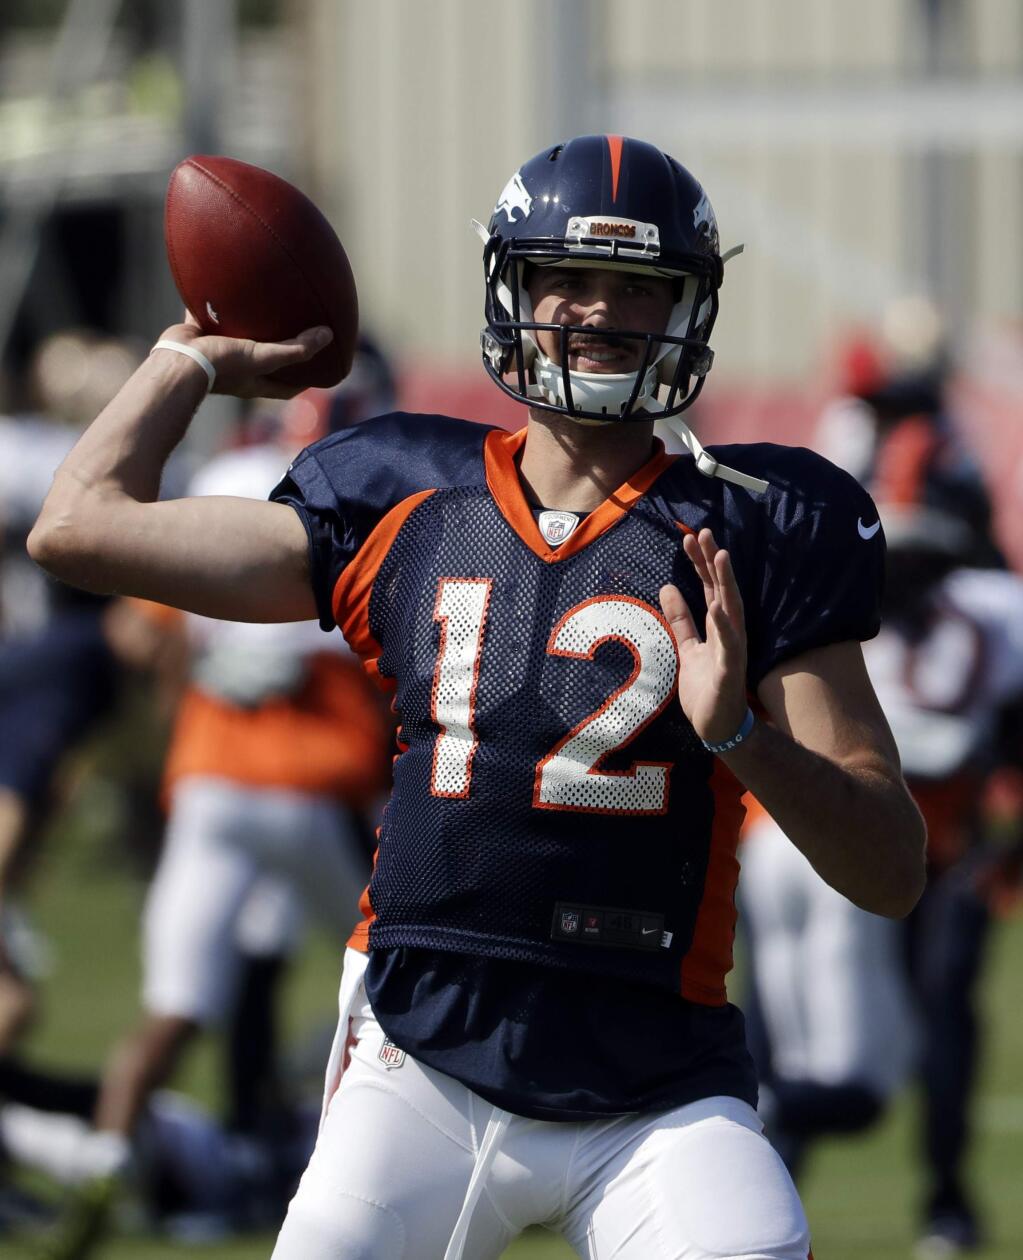 Denver Broncos quarterback Paxton Lynch throws during a joint NFL football practice with the San Francisco 49ers Wednesday, Aug. 16, 2017, in Santa Clara, Calif. (AP Photo/Marcio Jose Sanchez)